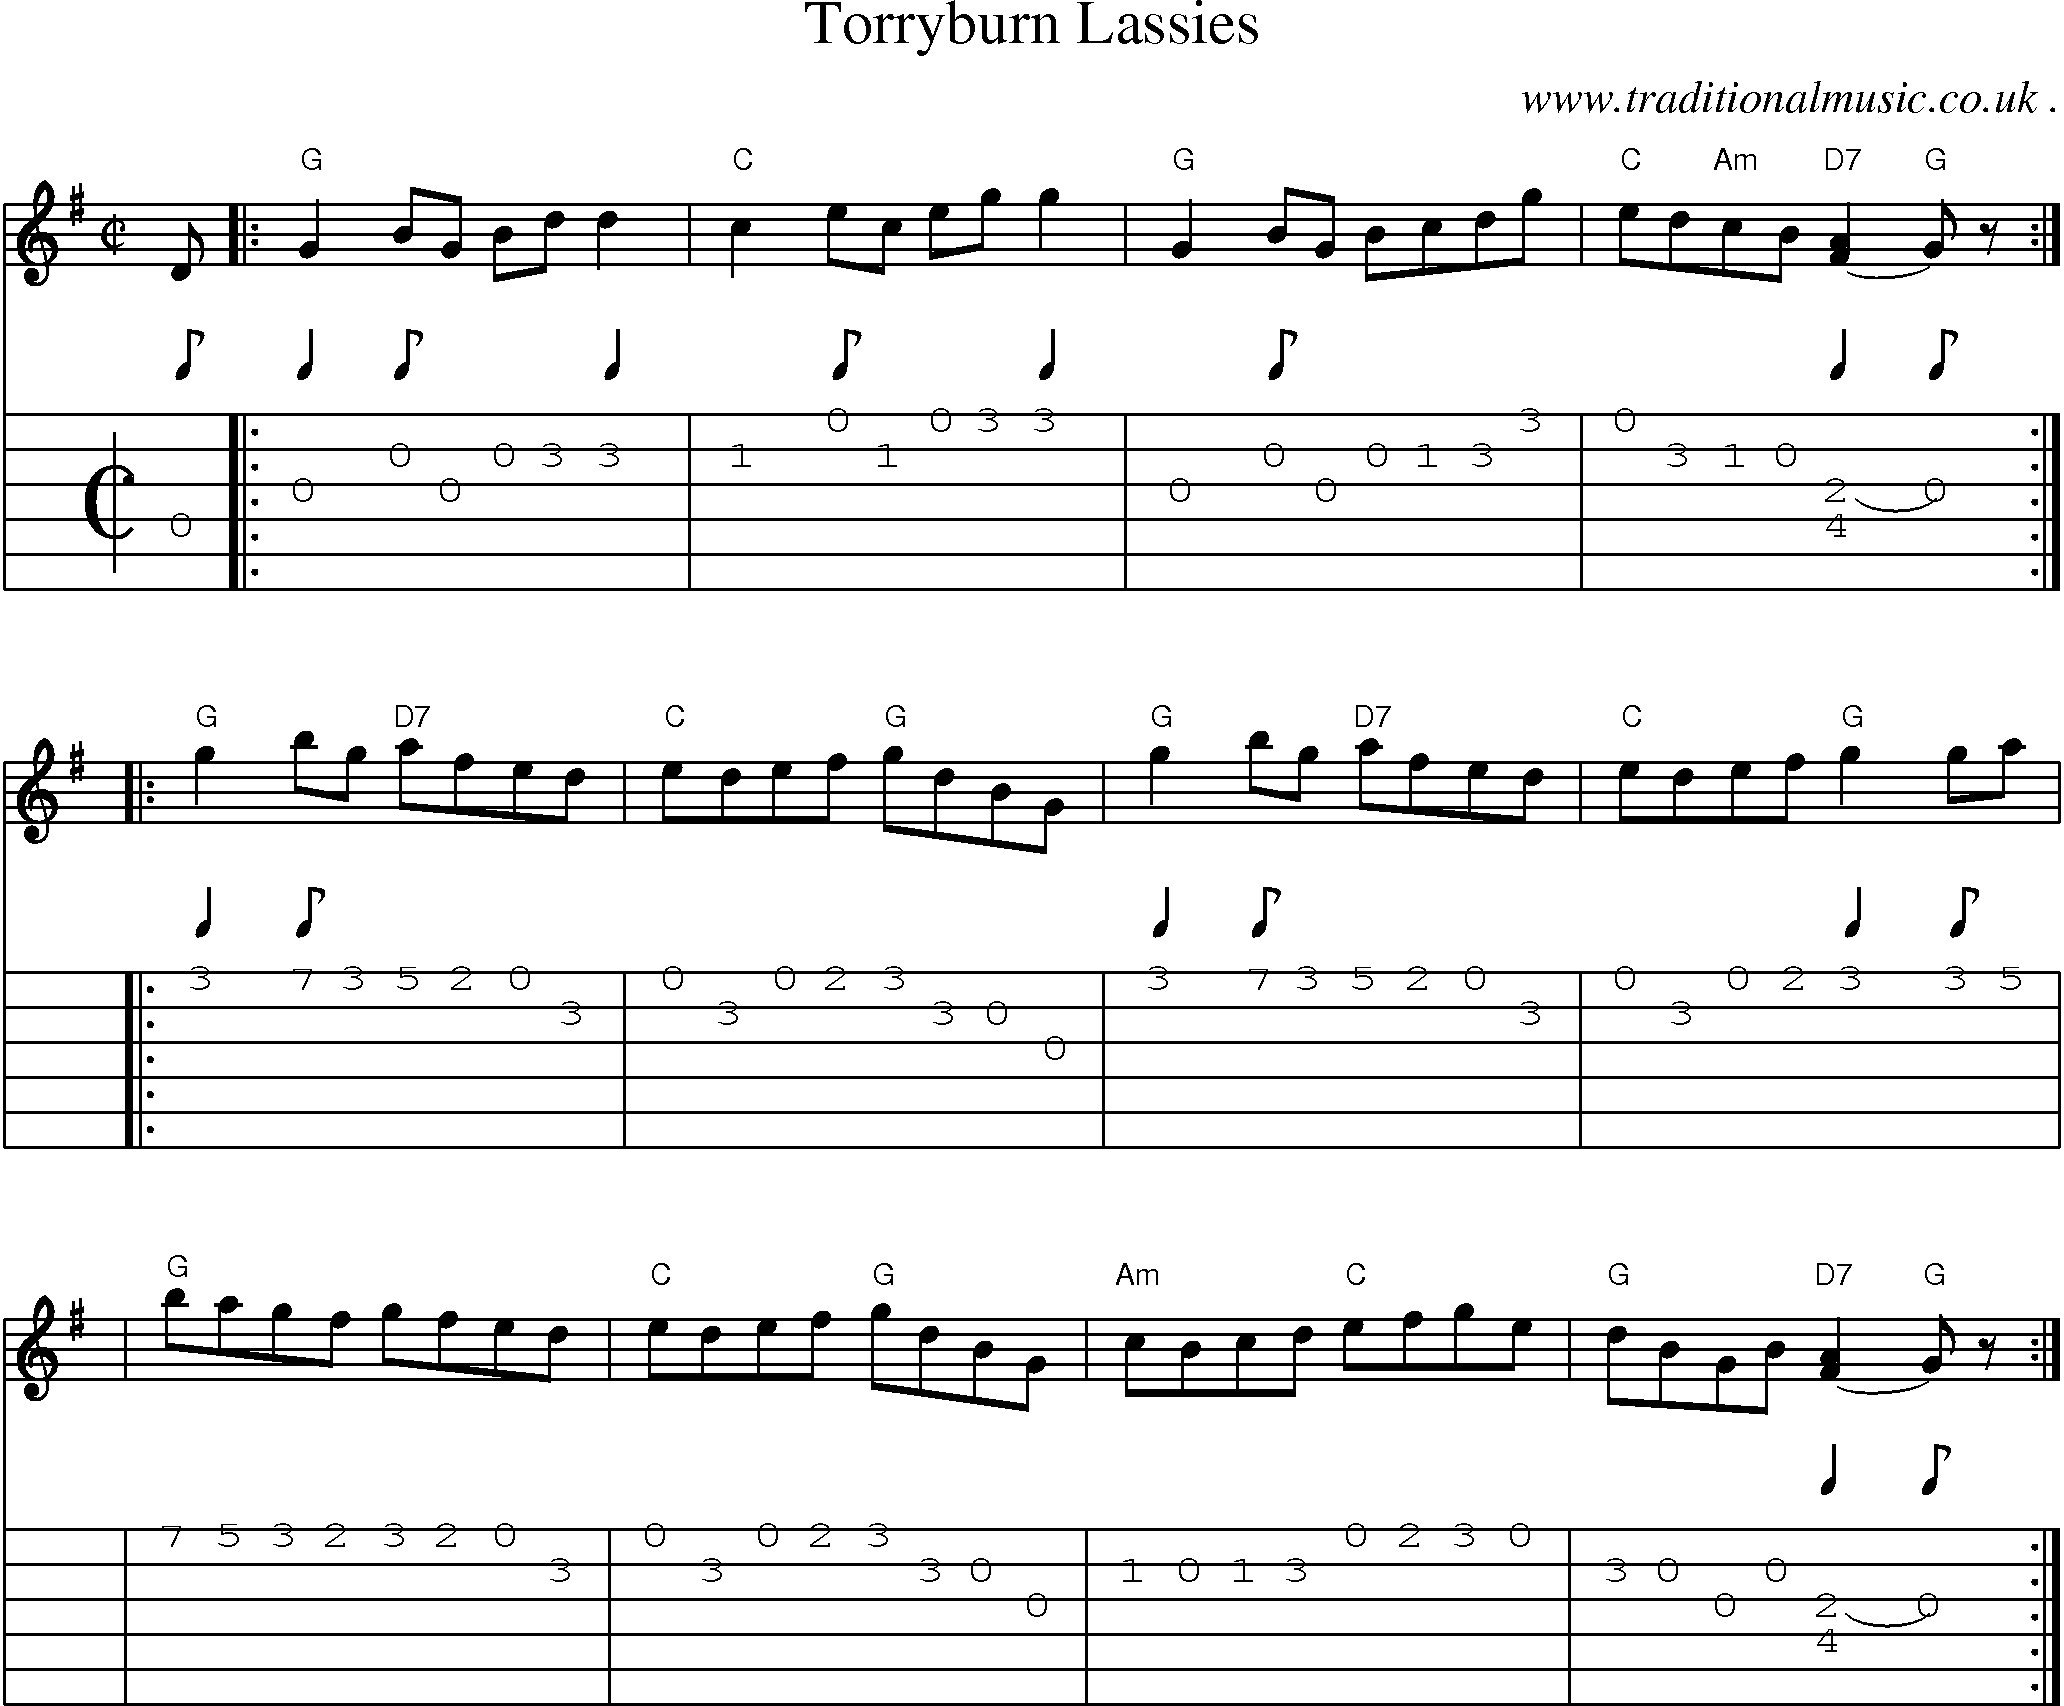 Sheet-music  score, Chords and Guitar Tabs for Torryburn Lassies